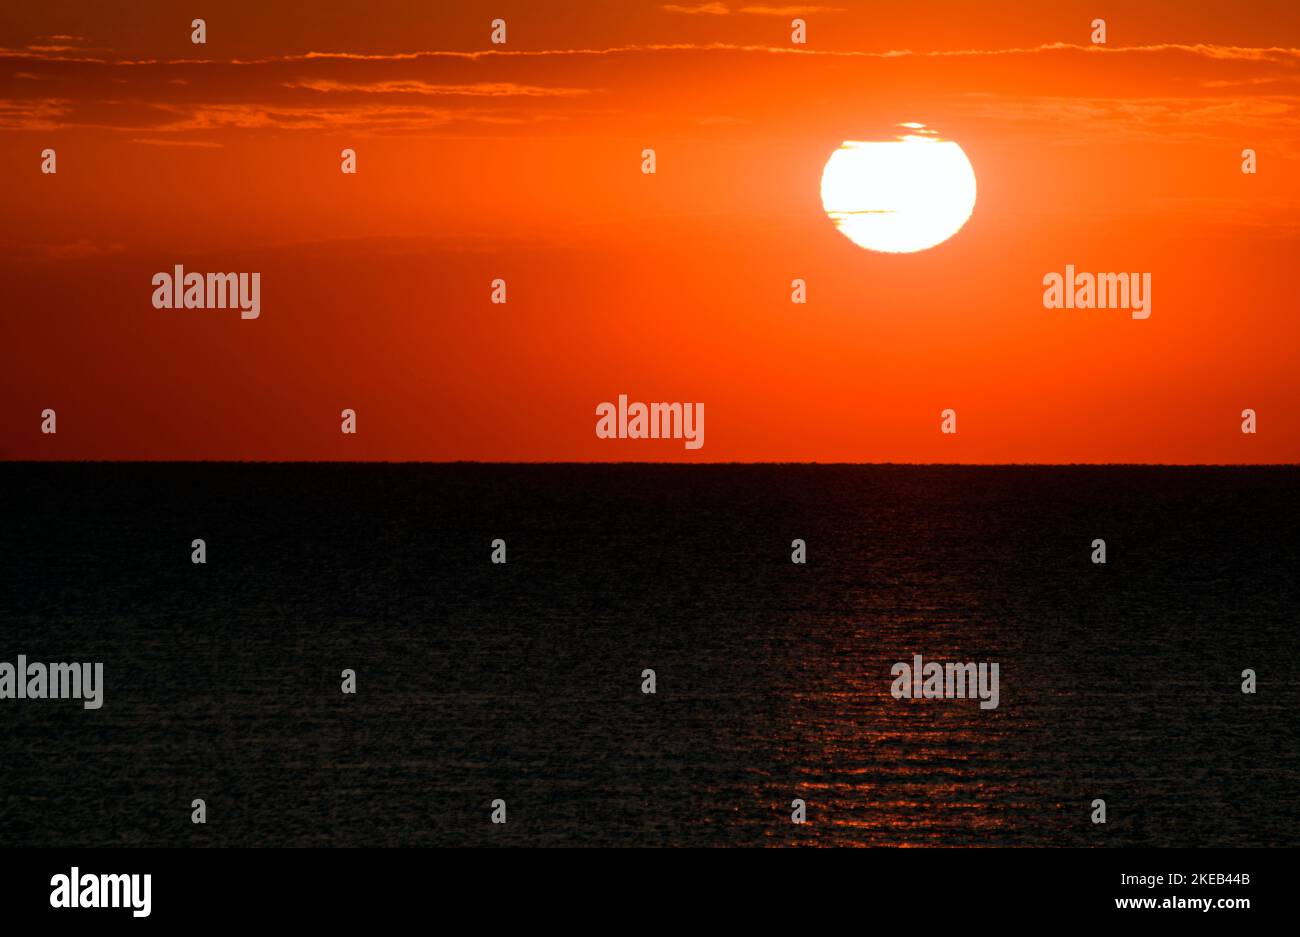 A spectacular sunrise over the sea, the sun rising from beyond the horizon line in a beautiful red sky. Stock Photo